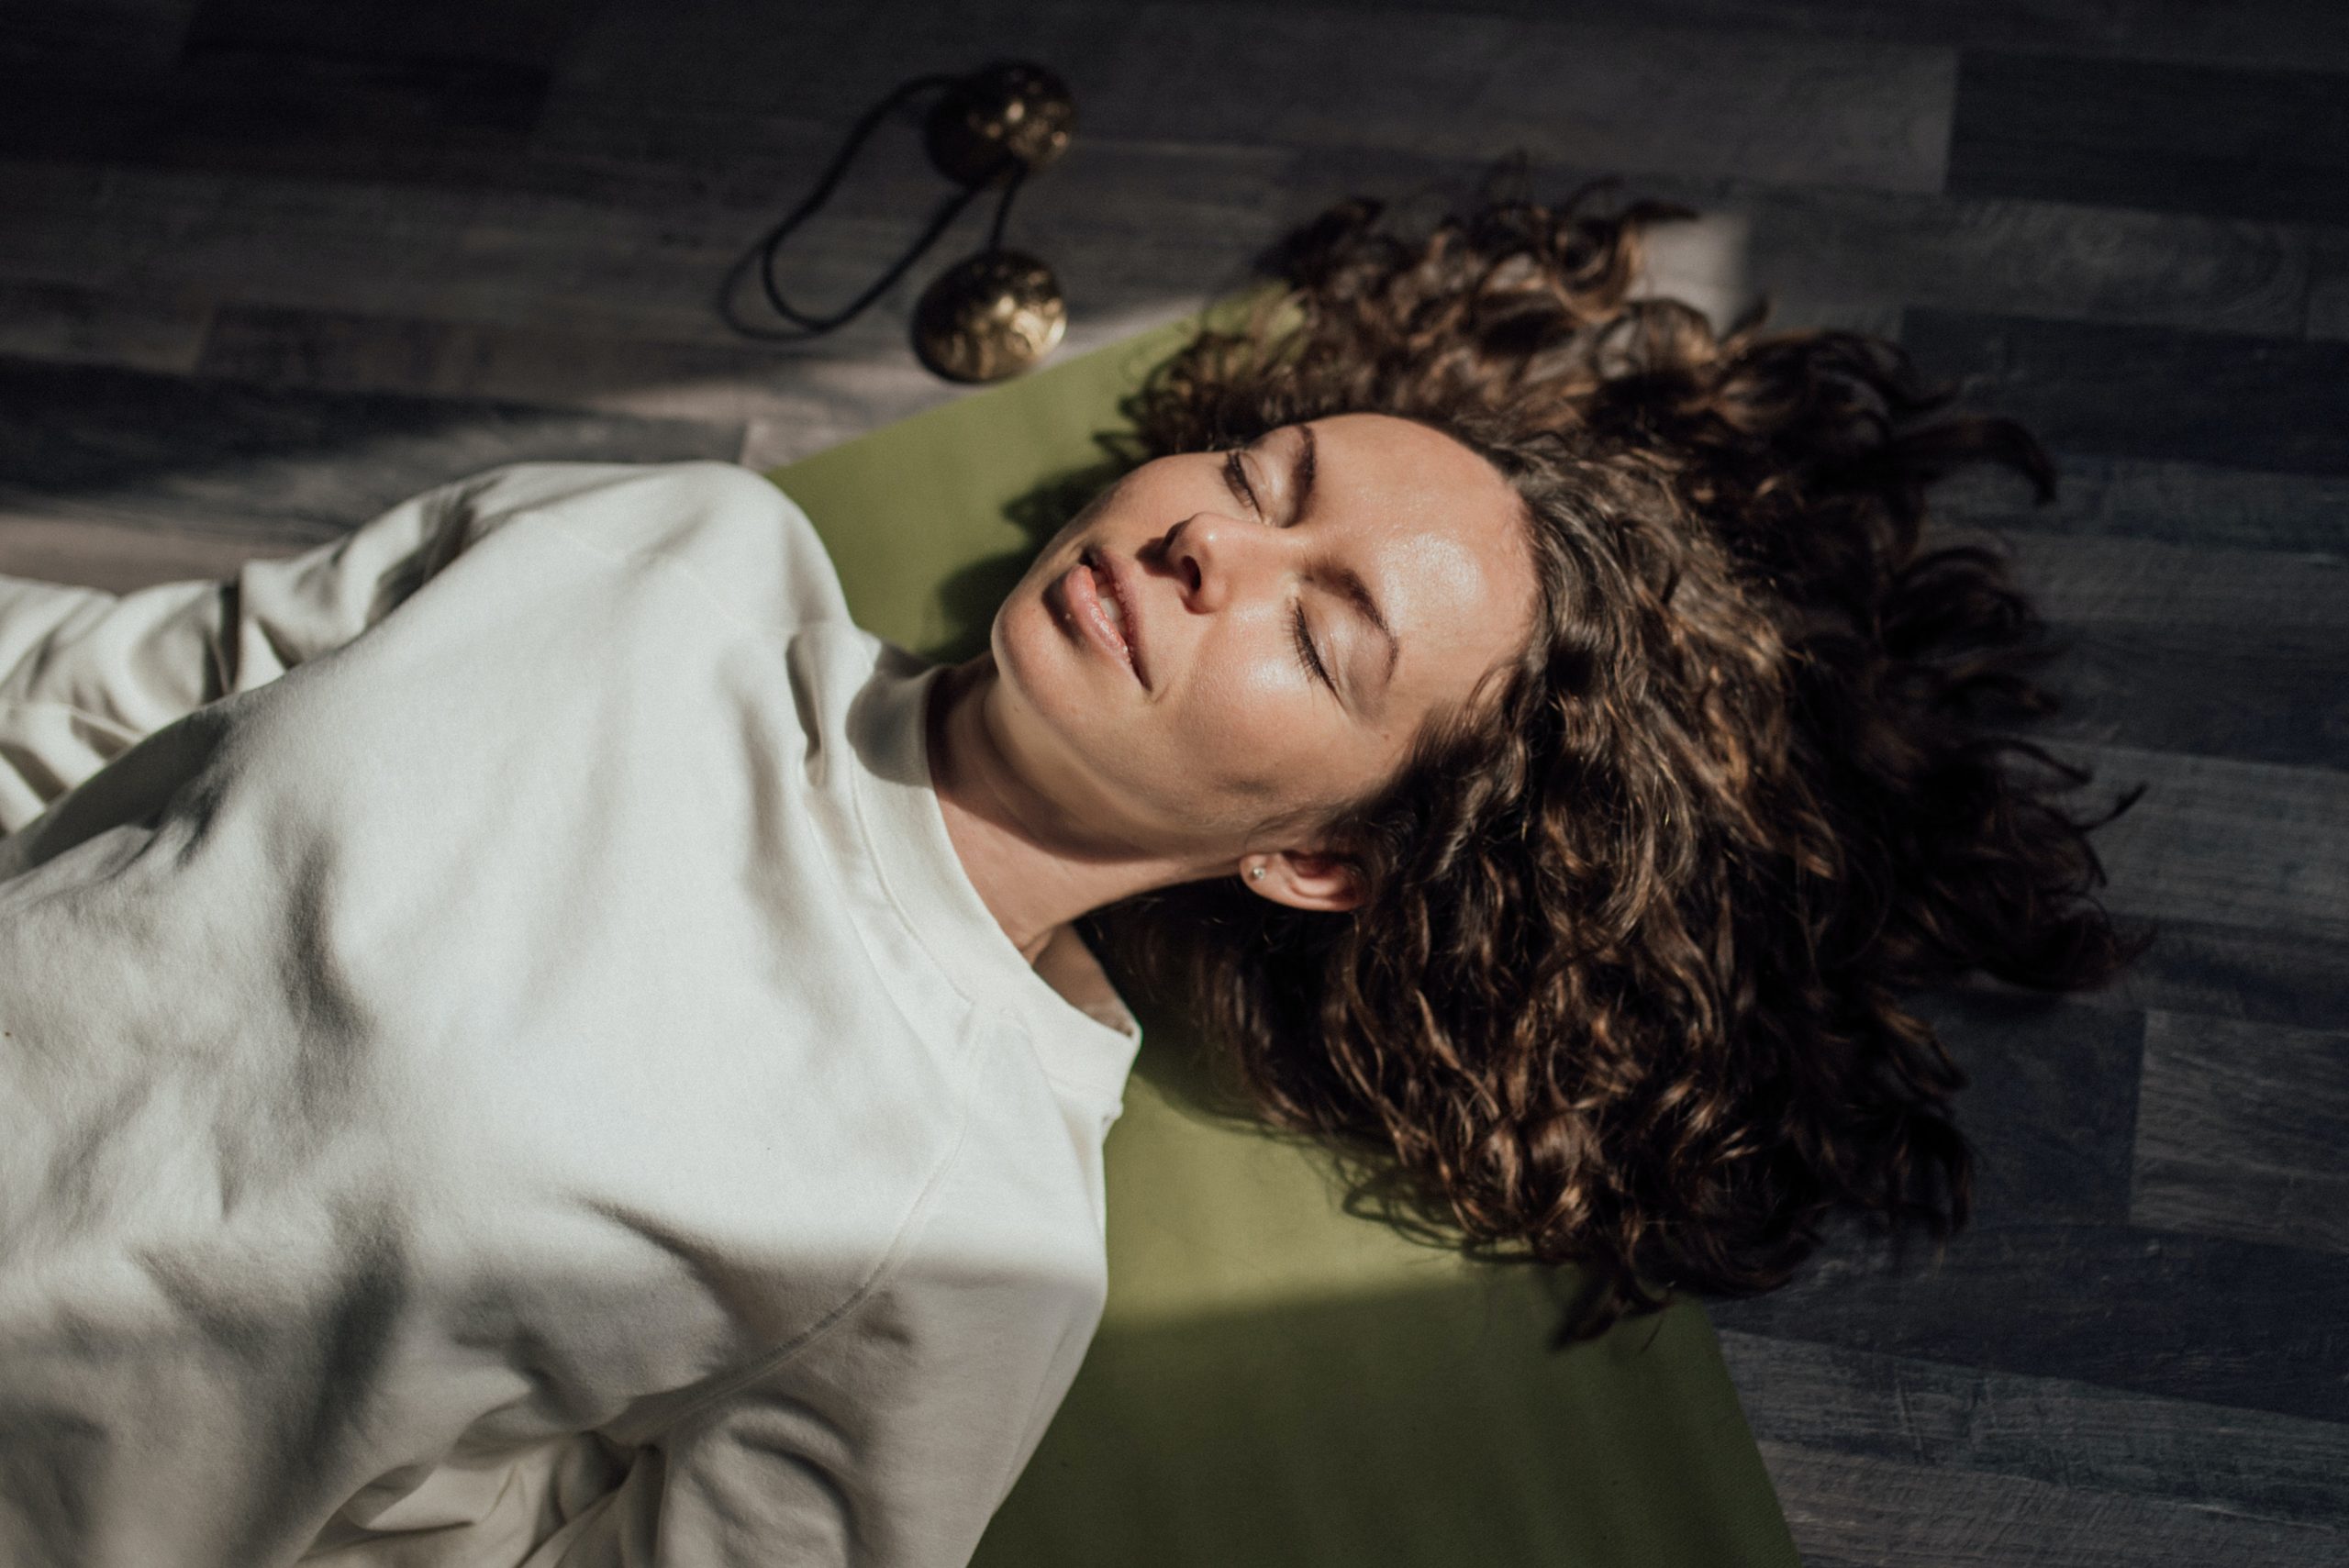 A white woman with short and curly hair is lying down smiling with her eyes shut. She is on a green yoga mat and wears a white sweater.,